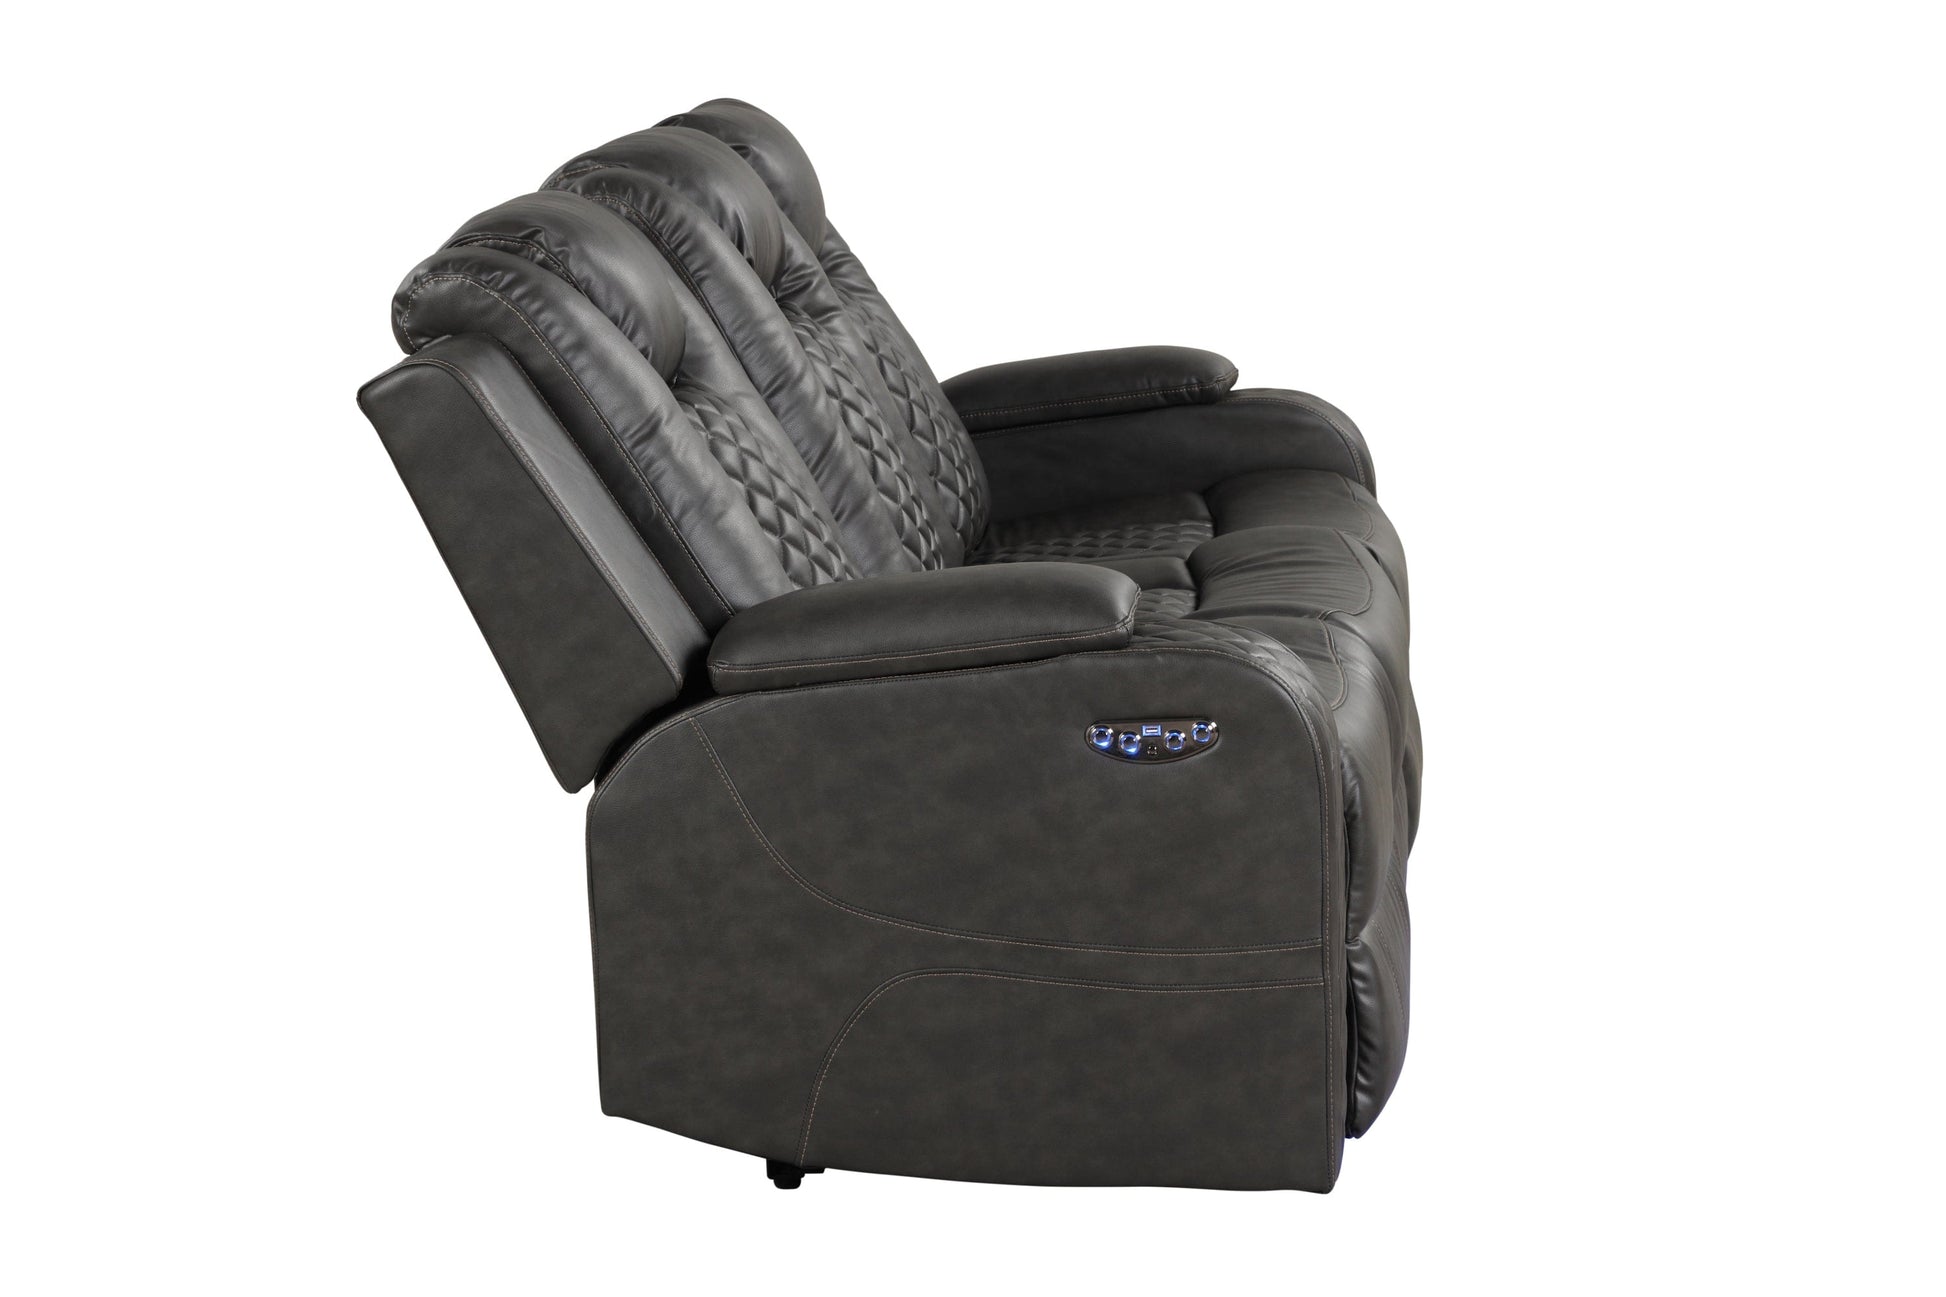 1st Choice Furniture Direct Recliner 1st Choice Gray Faux Leather Power Recliner Set with Benz LED